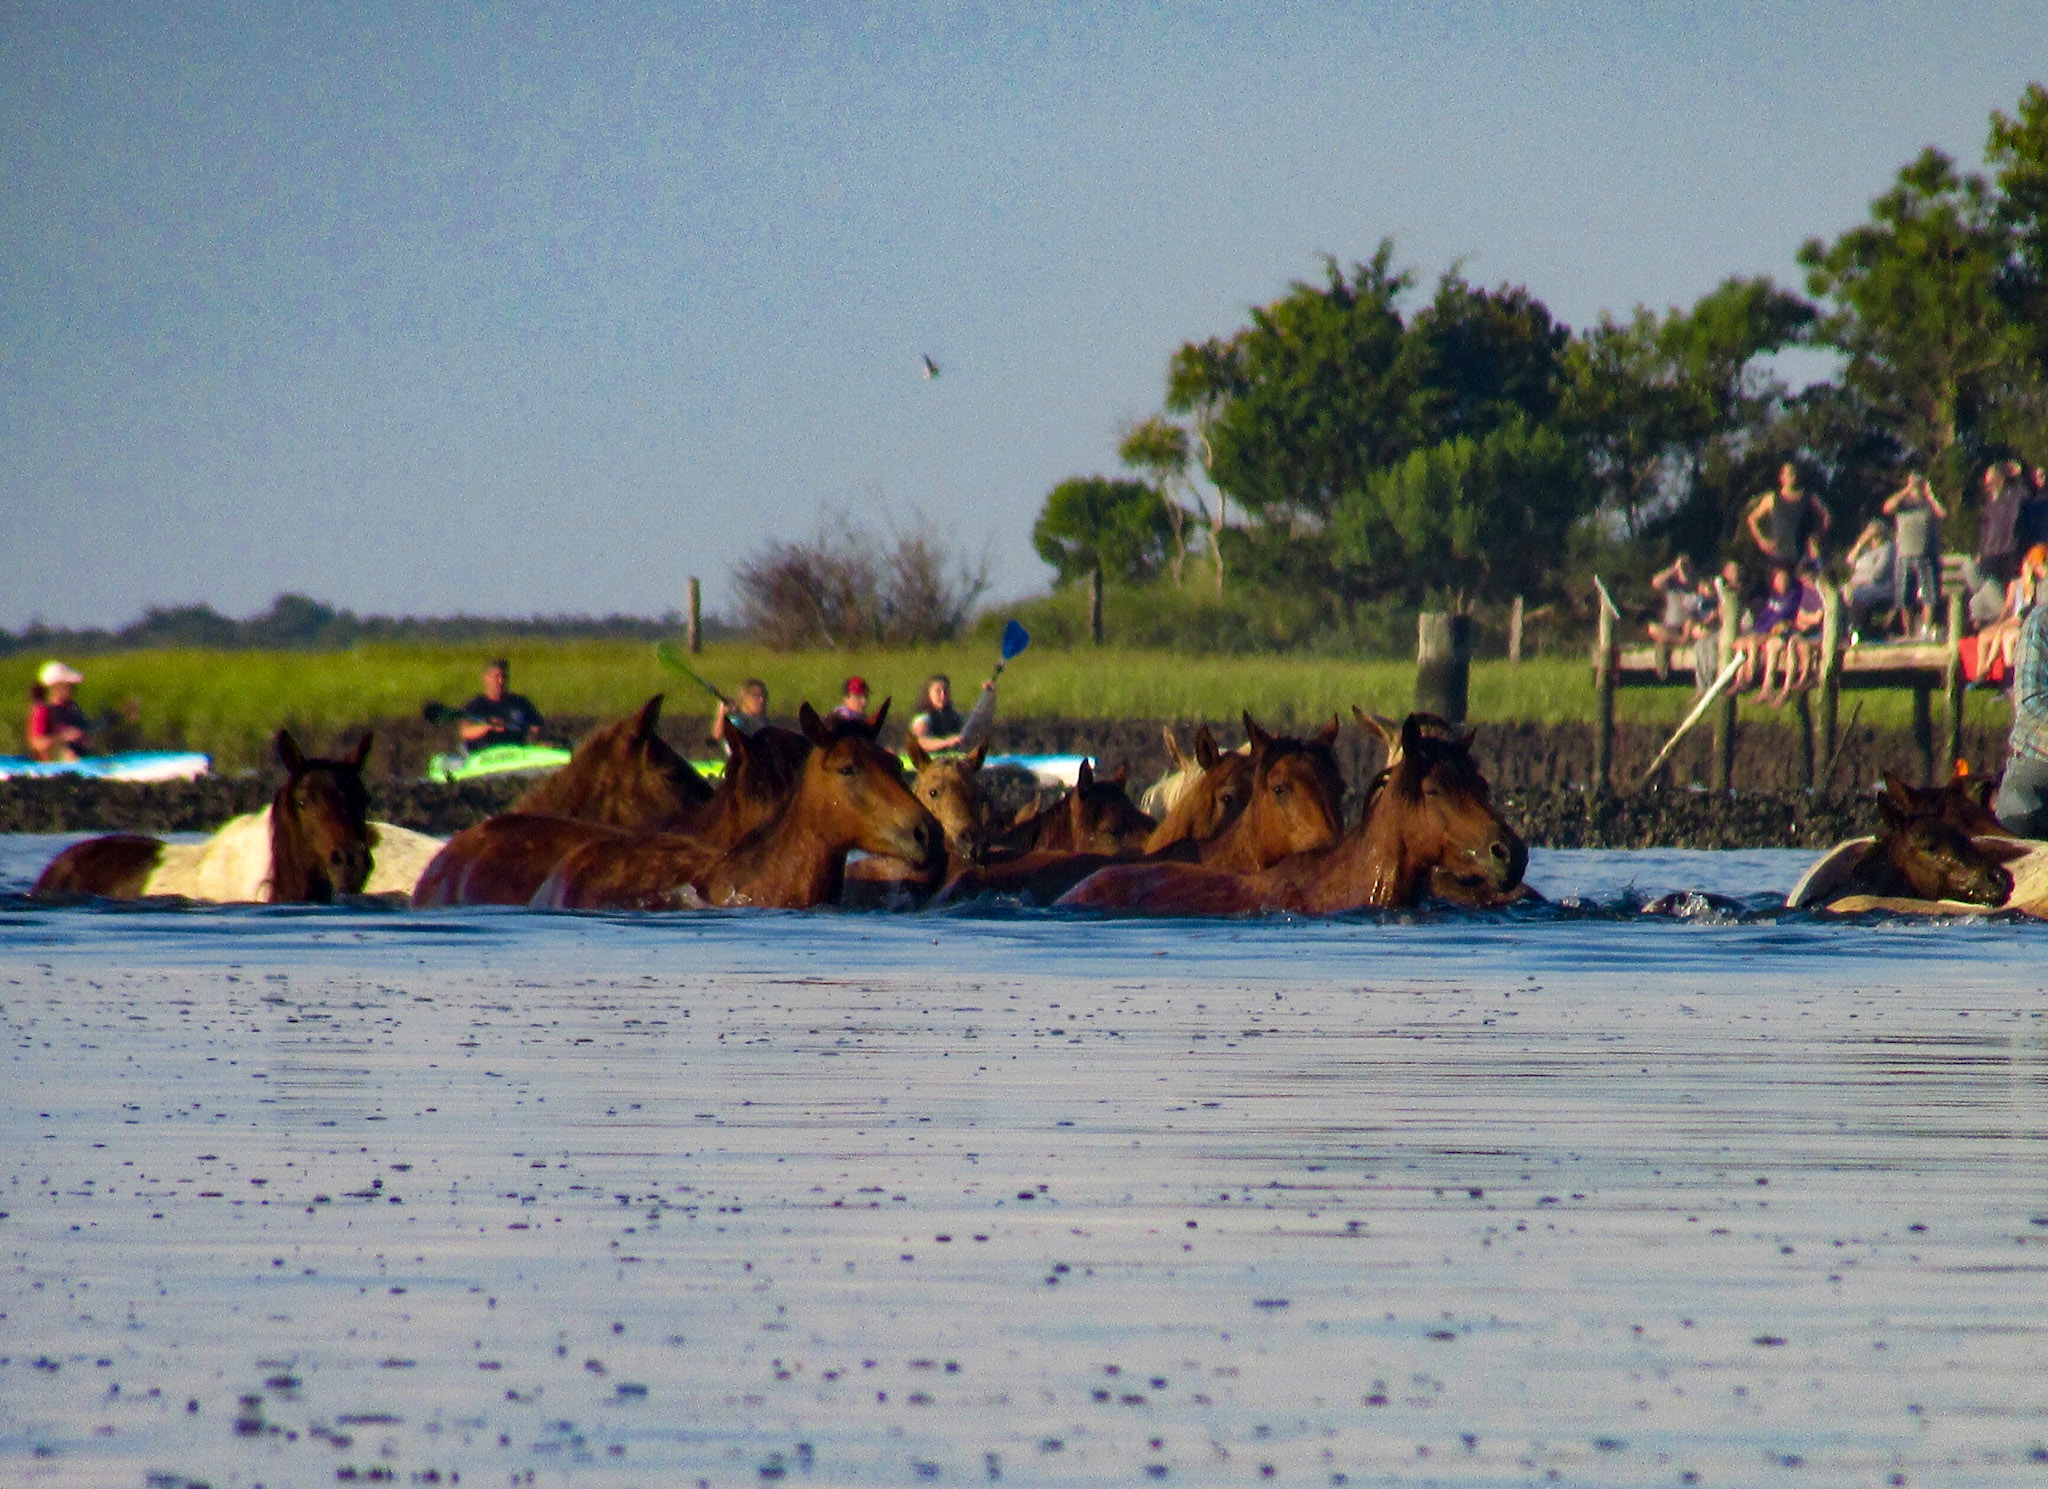 How to Enjoy Chincoteague Island’s Annual Pony Swim for the First Time